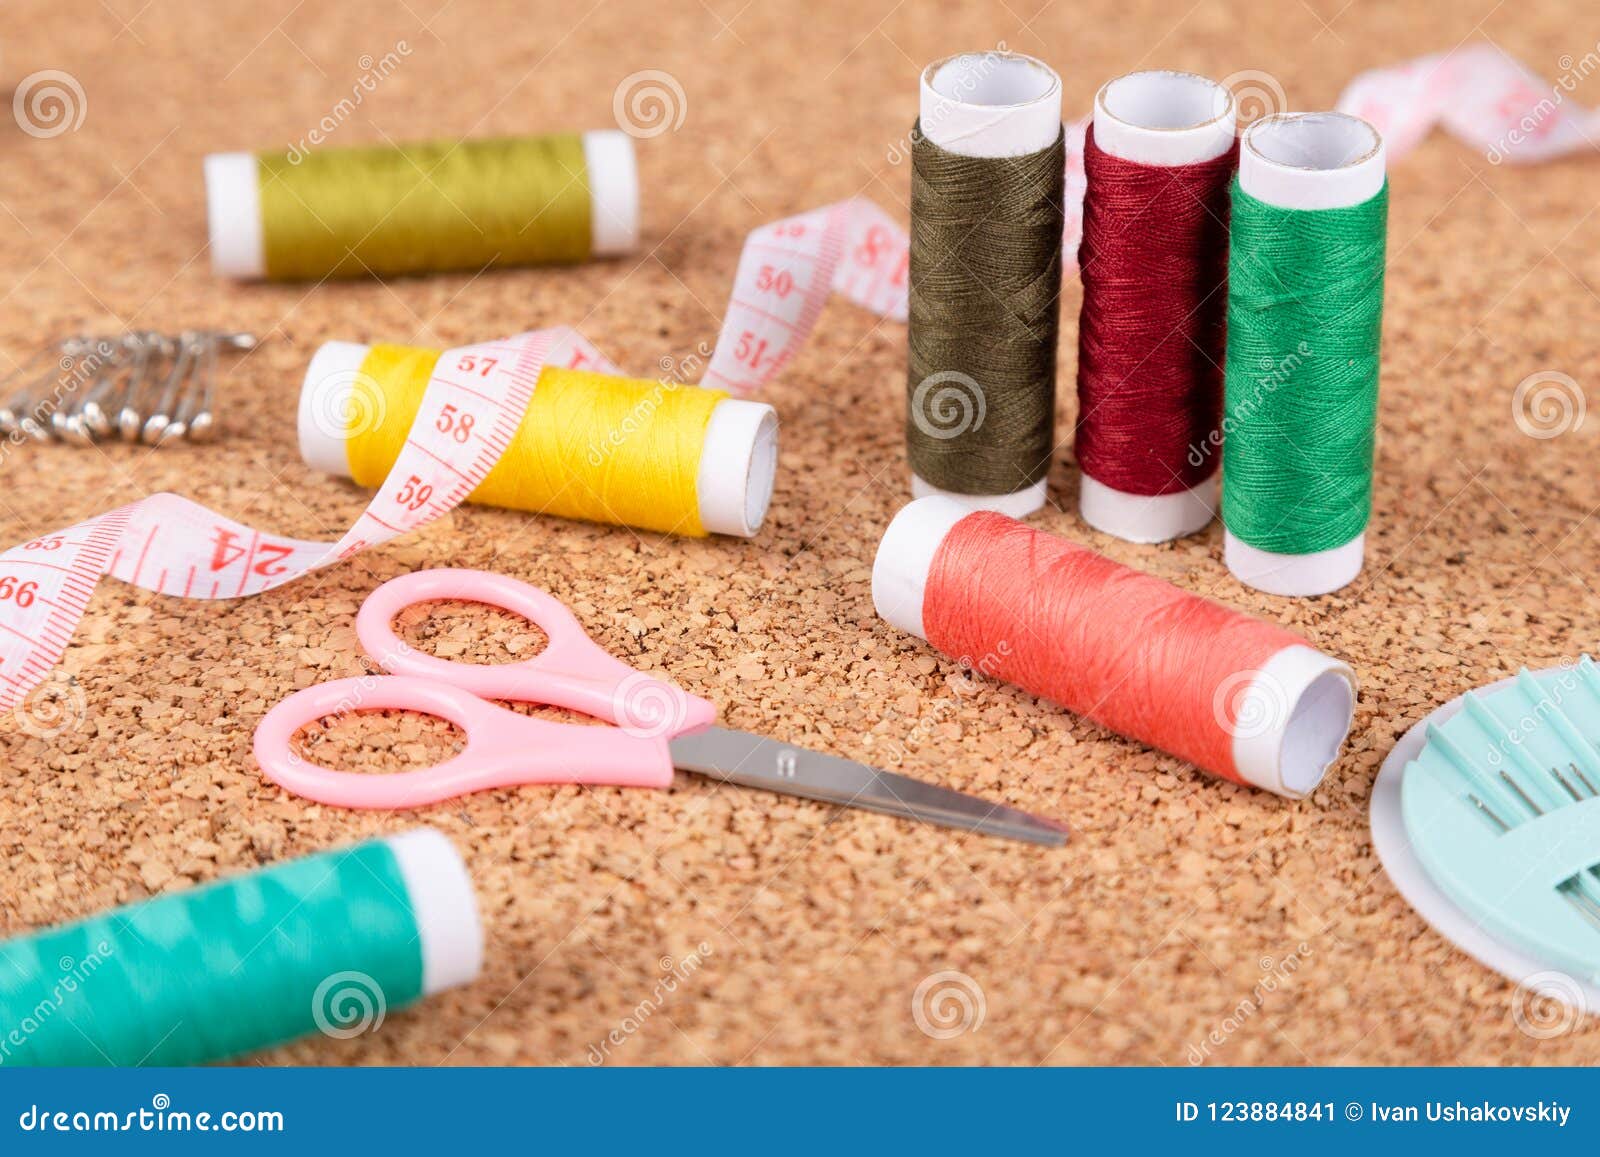 Sewing Kit with Colorful Spools of Threads and Instruments Stock Image ...